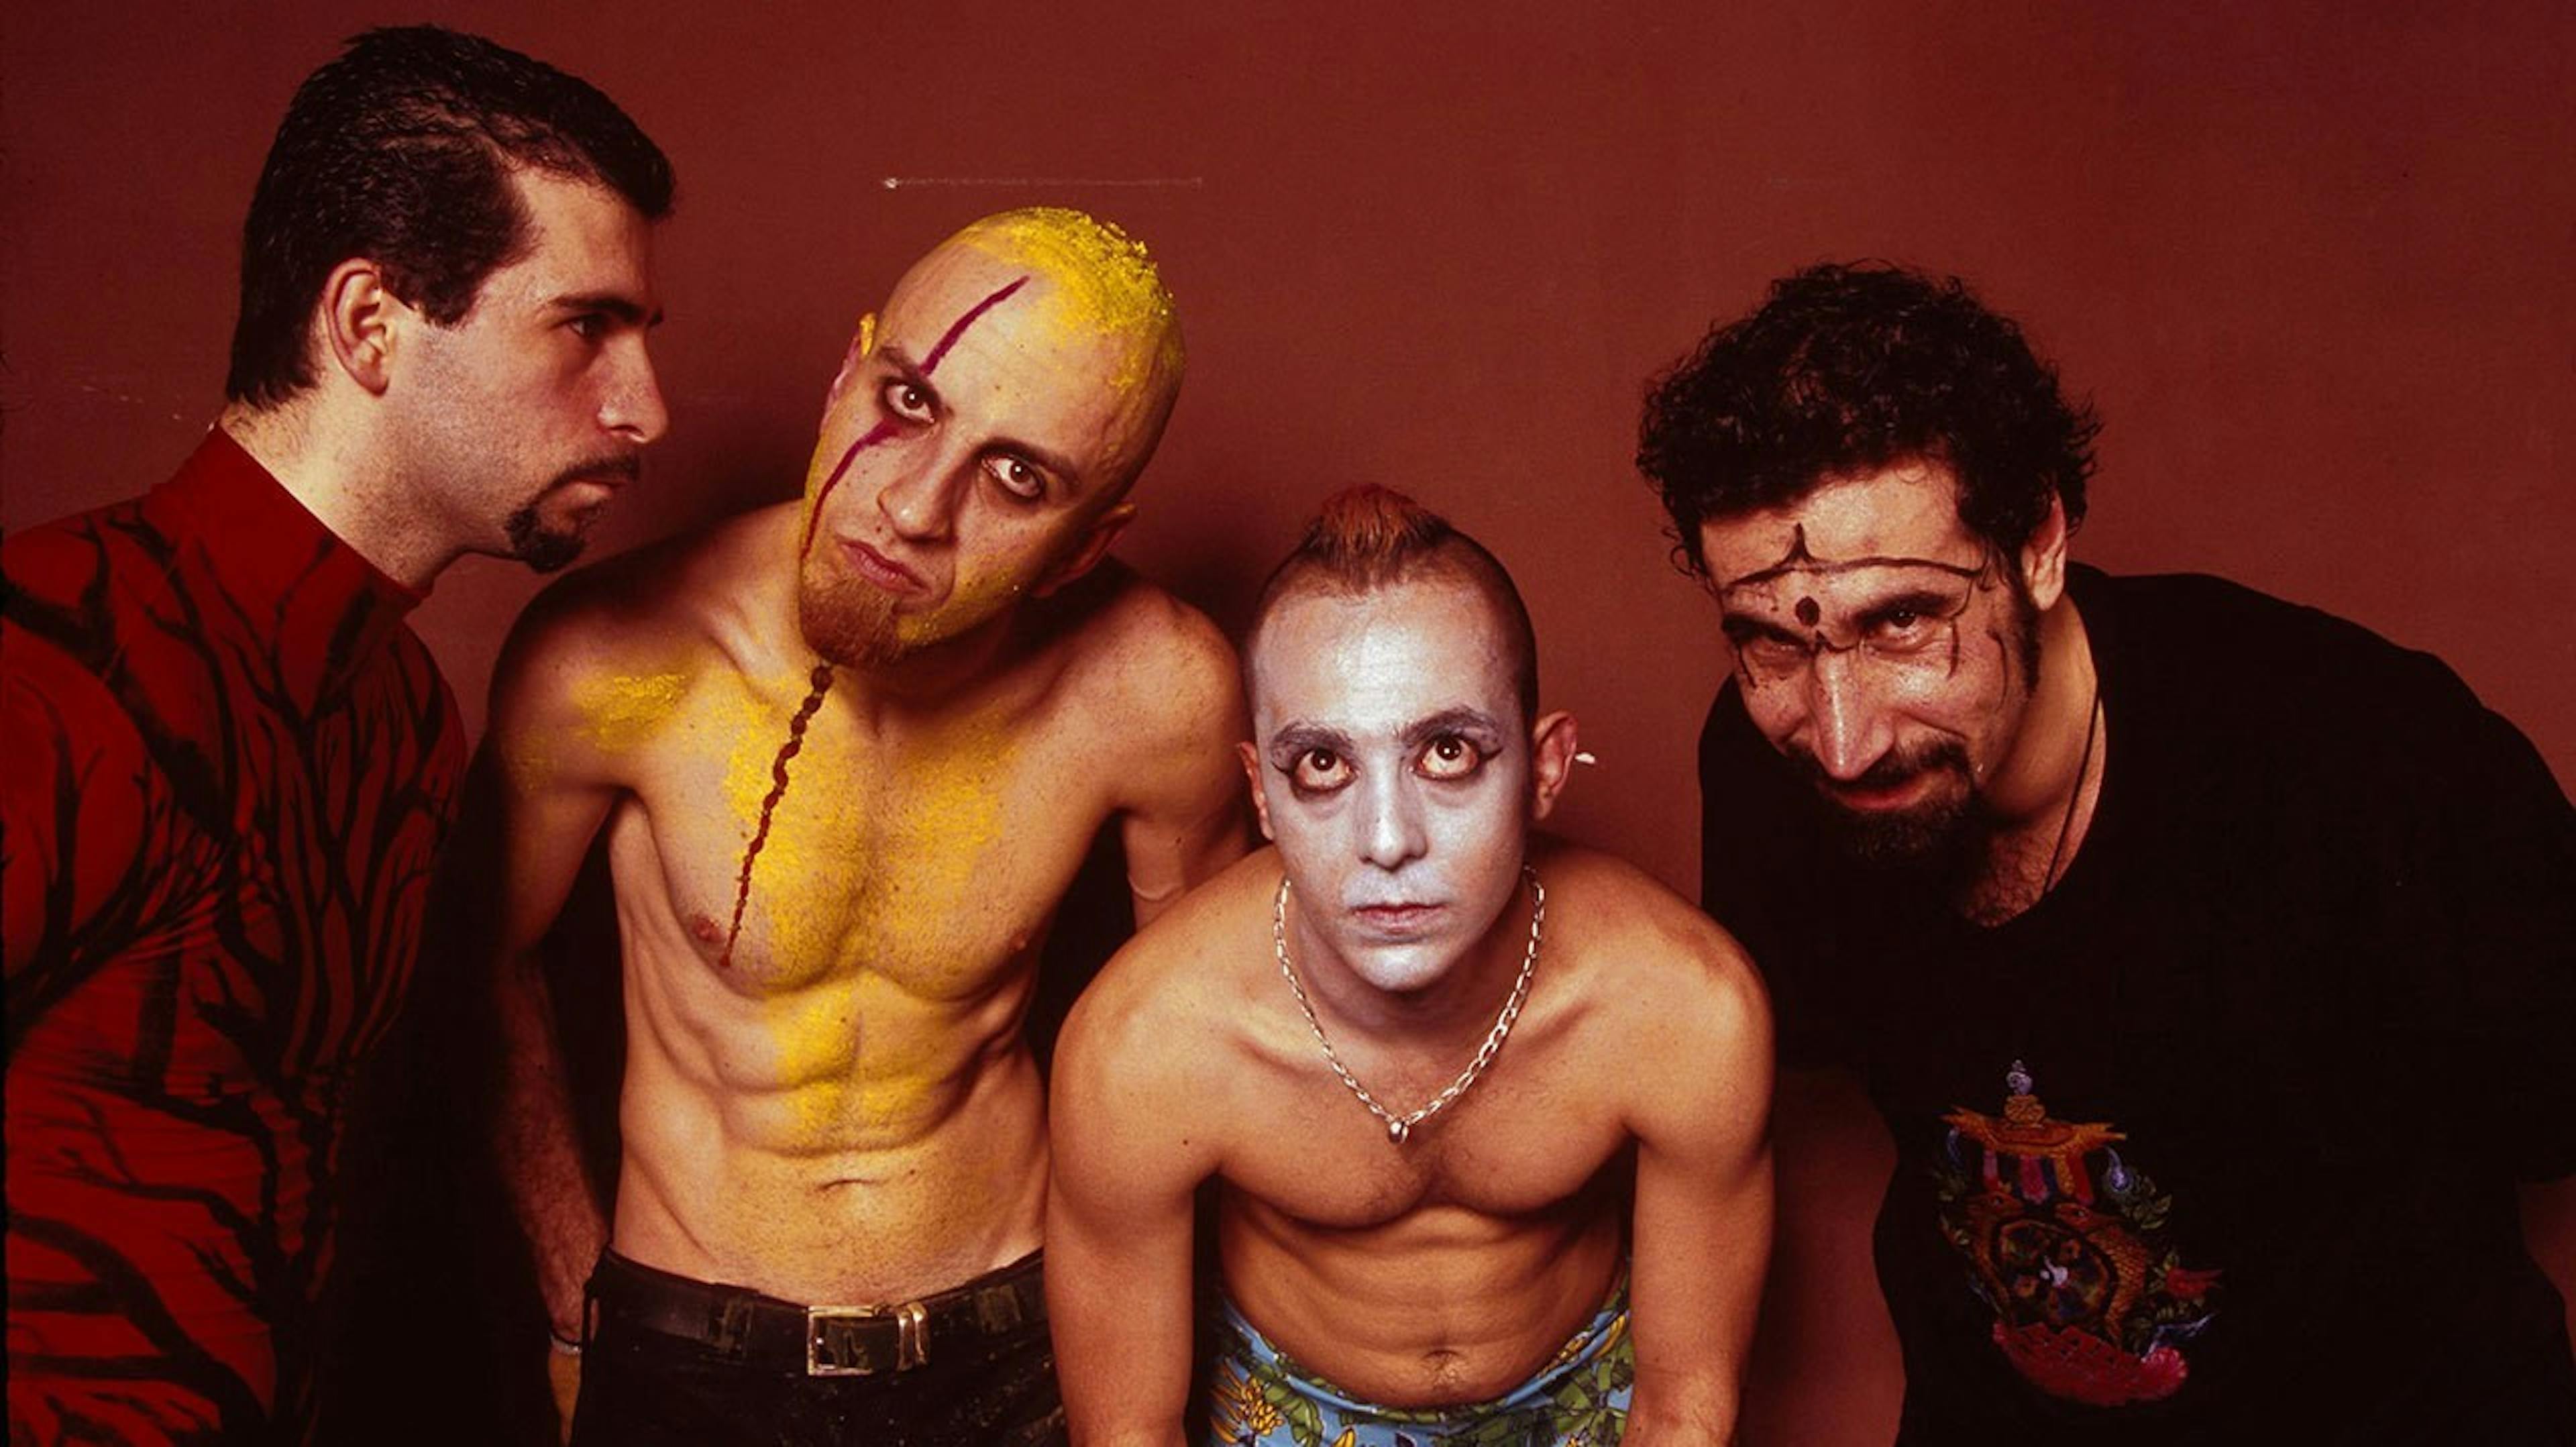 System Of A Down Bassist Discusses Band's Early Days In Documentary